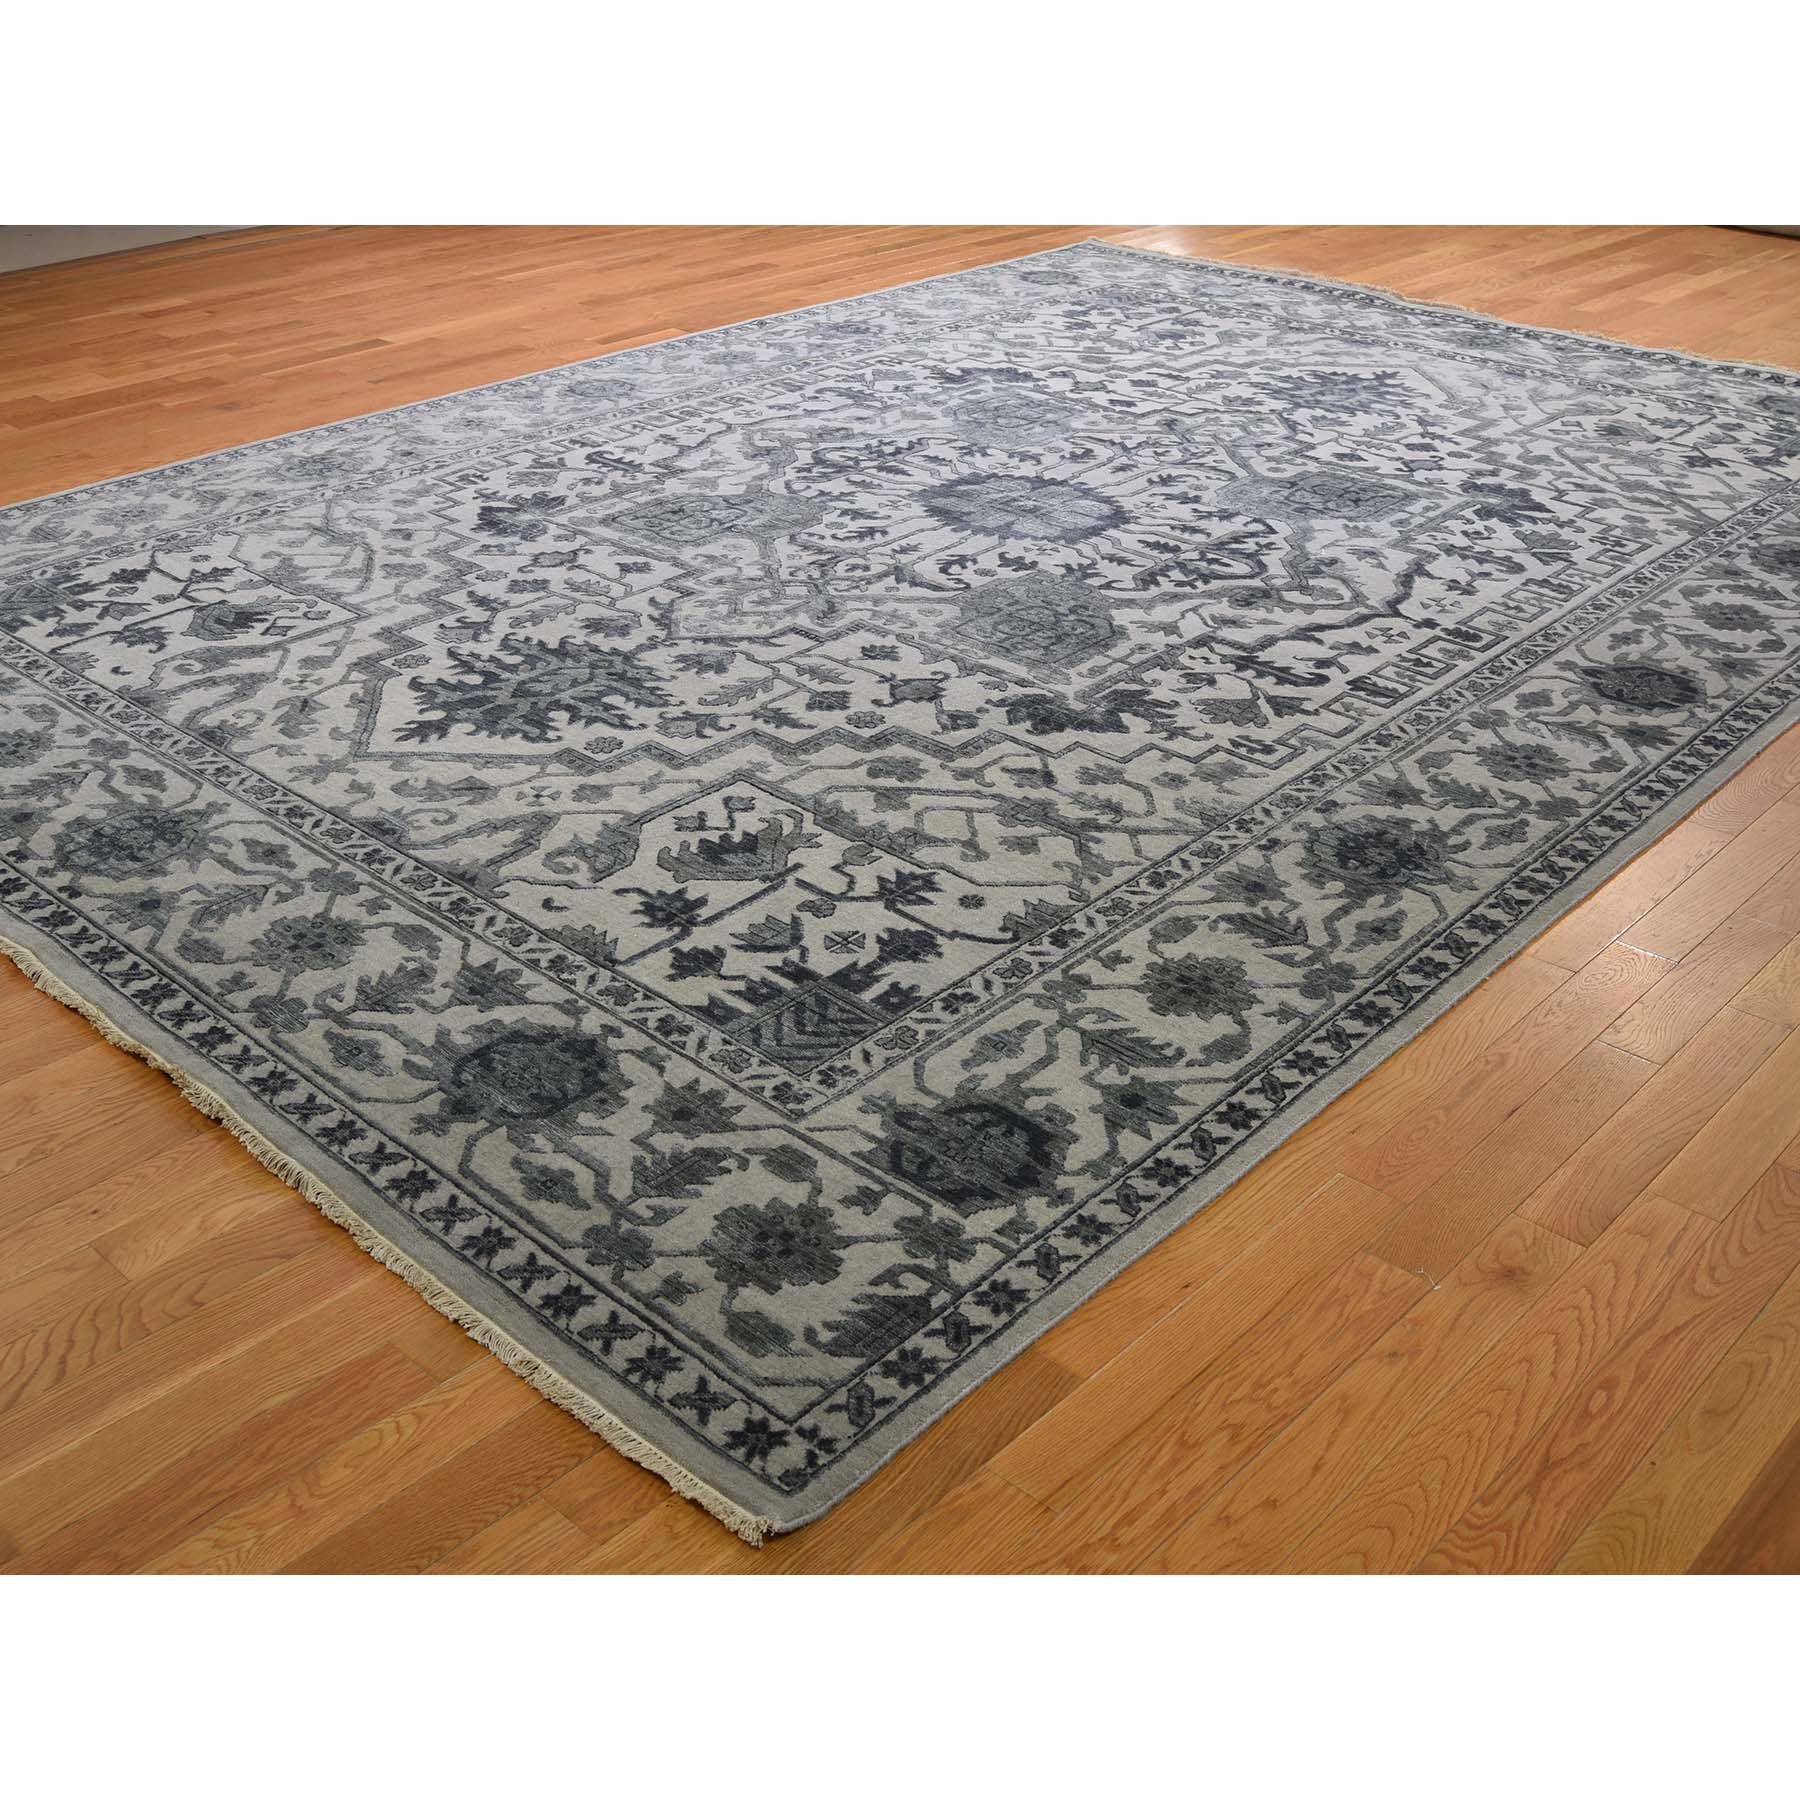 10-x14- Silver Heriz Design Wool And Silk Hi-lo Pile Hand-Knotted Oriental Rug 